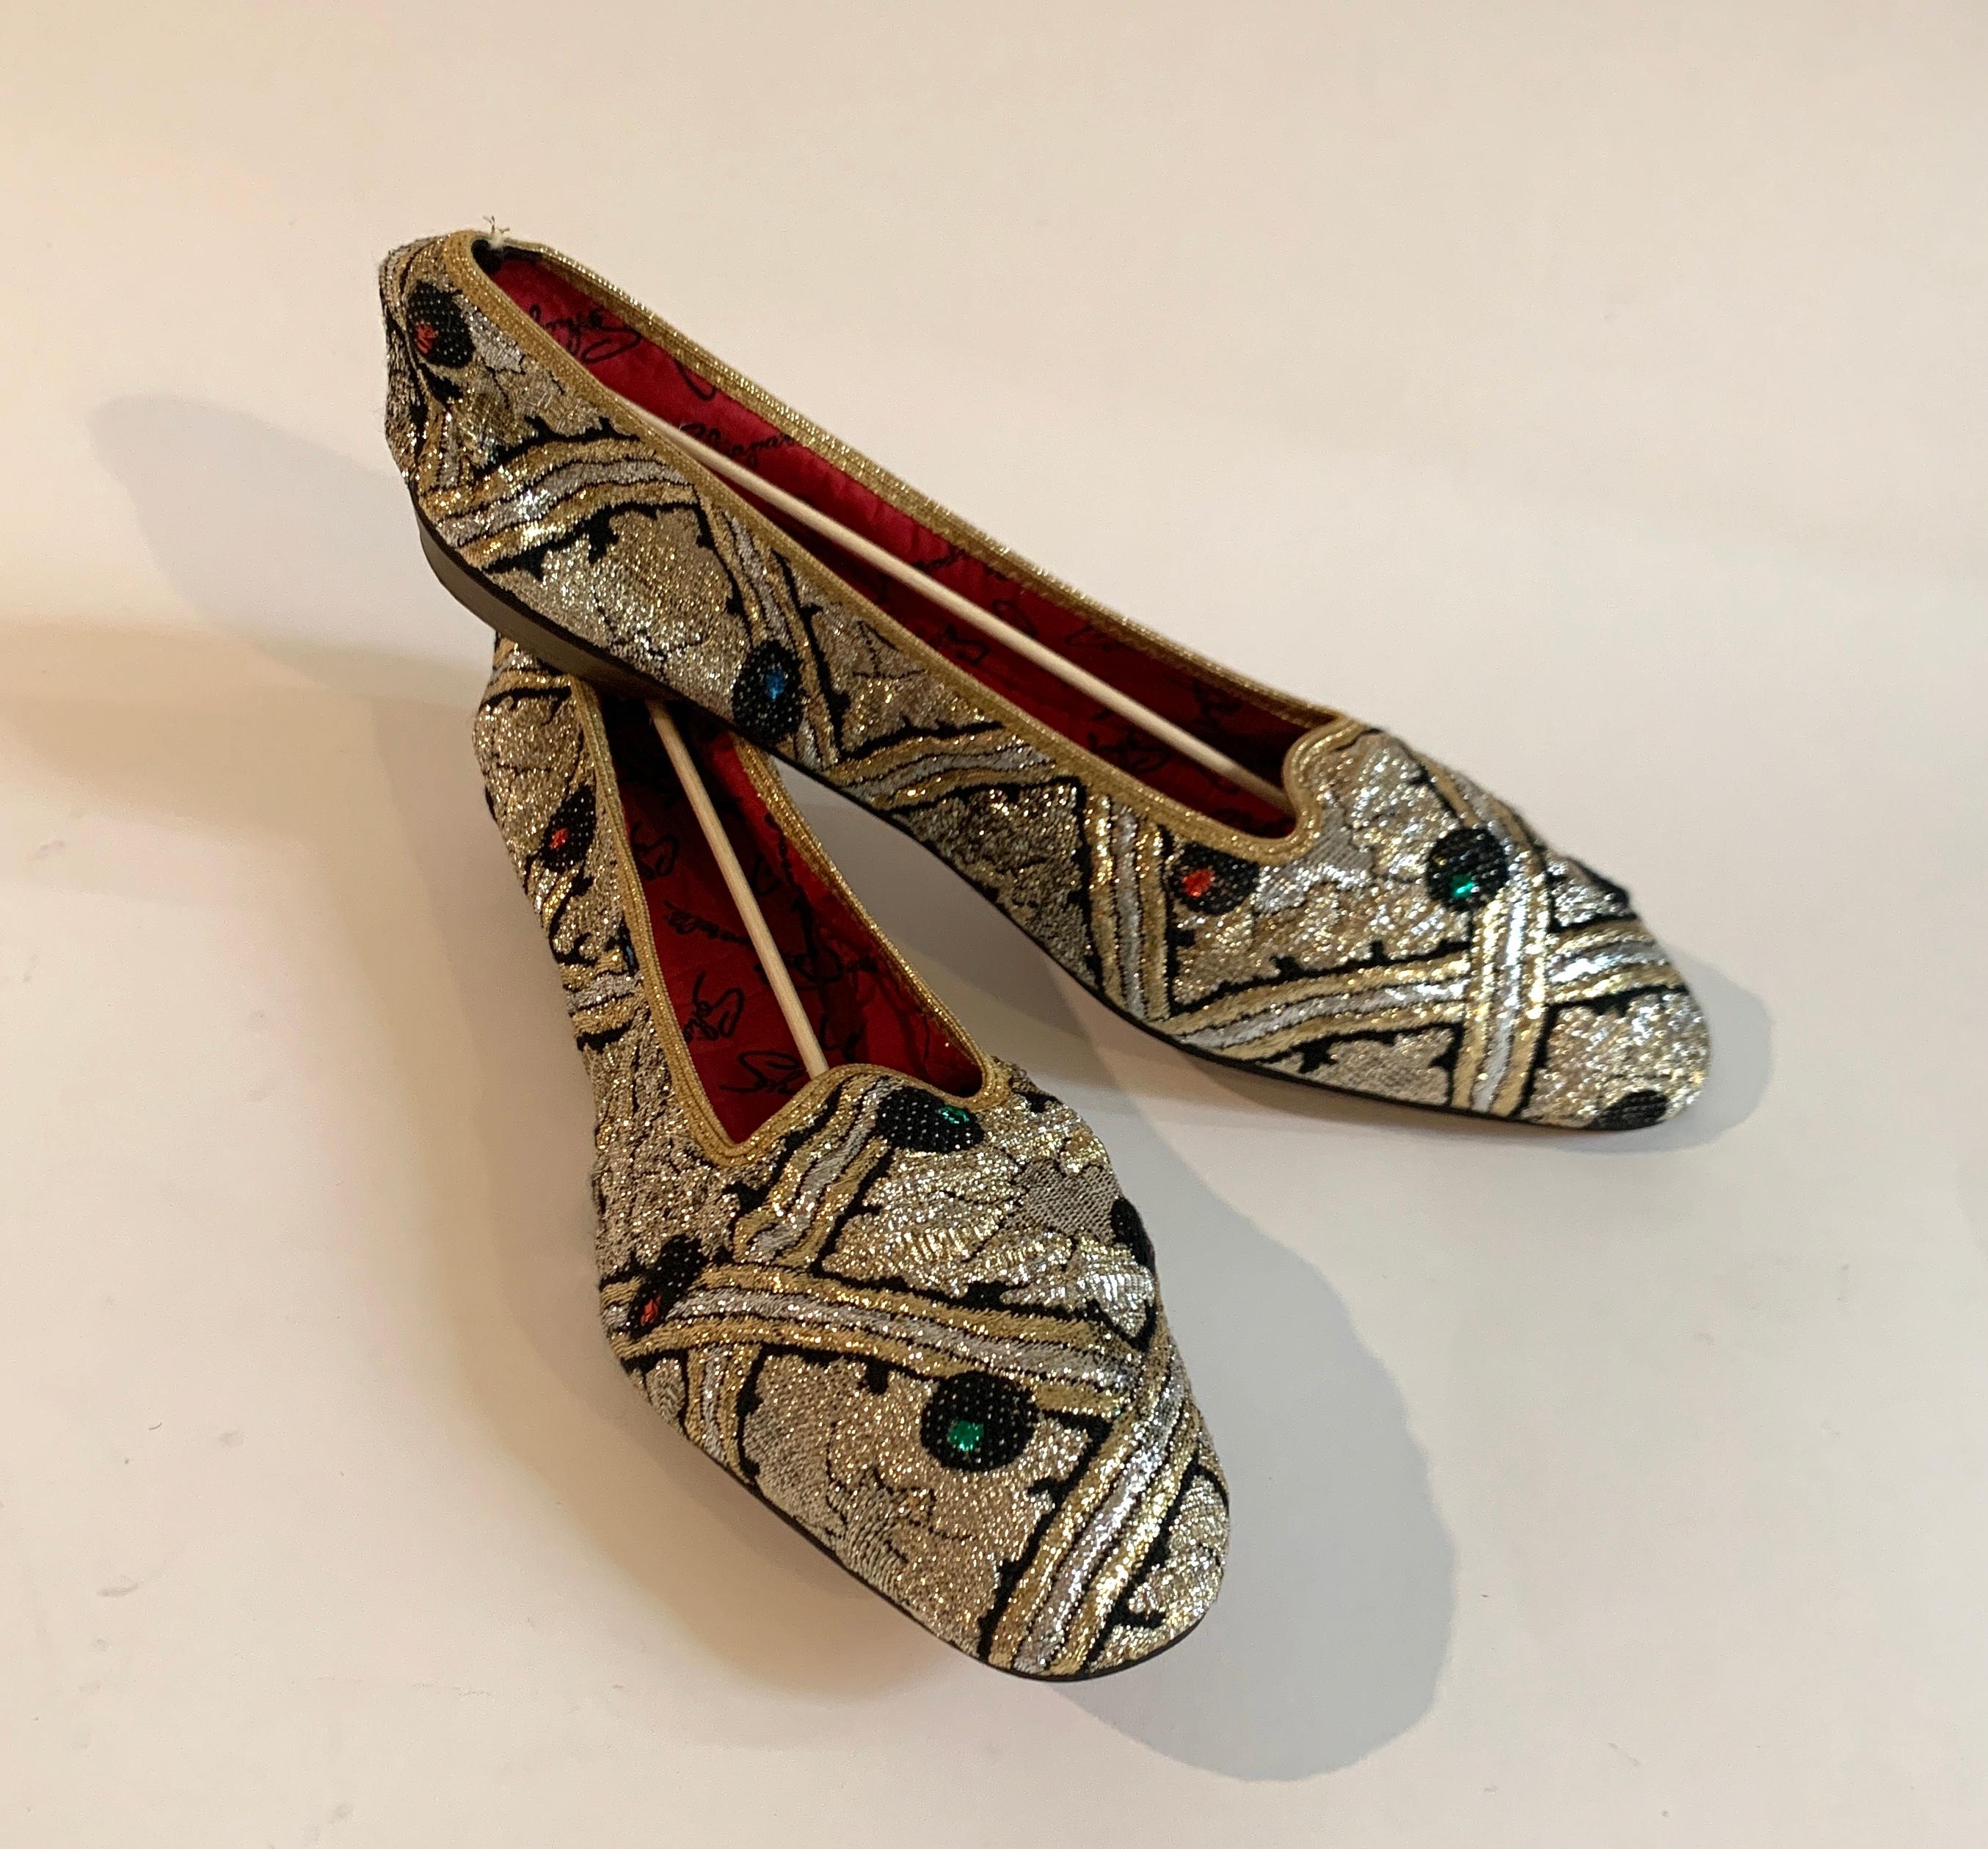 Elsa Schiaparelli 1960s deadstock foldable flats in silver and gold metallic brocade with green and red accents throughout. These utilitarian yet over the top flats are another amazing example of Schiaparelli being ahead of the times. Red